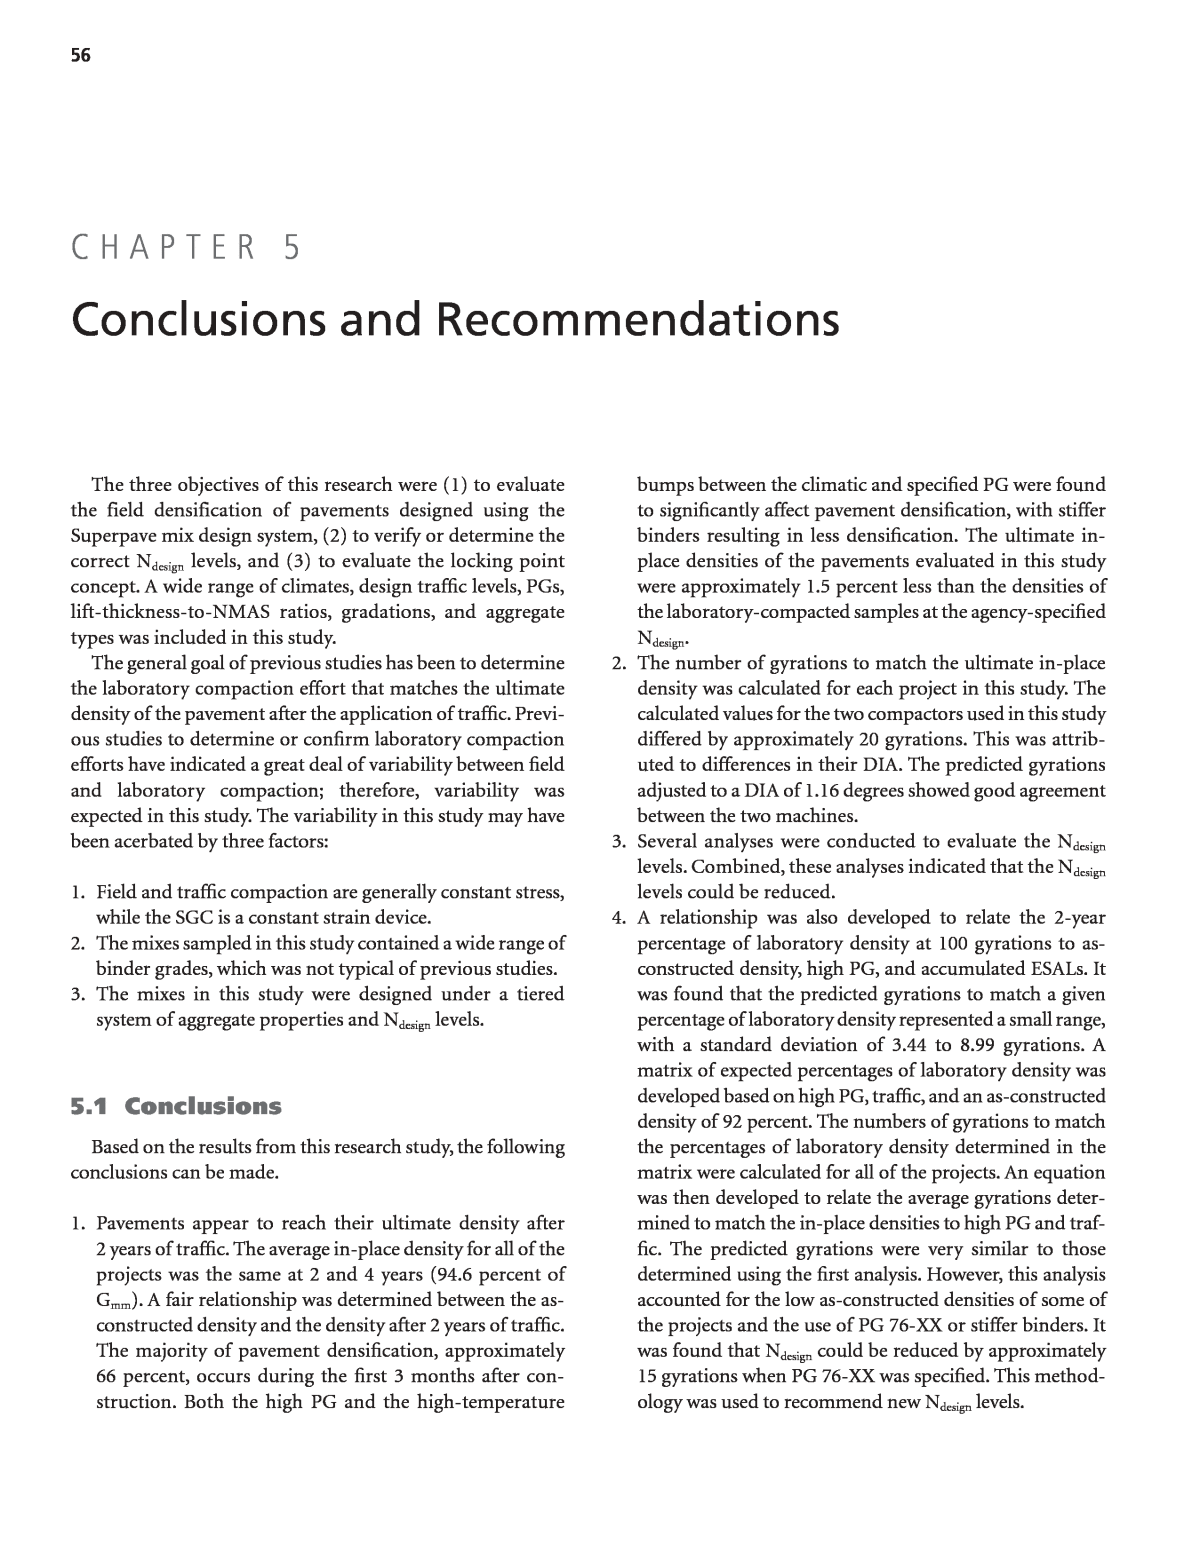 research recommendations chapter 5